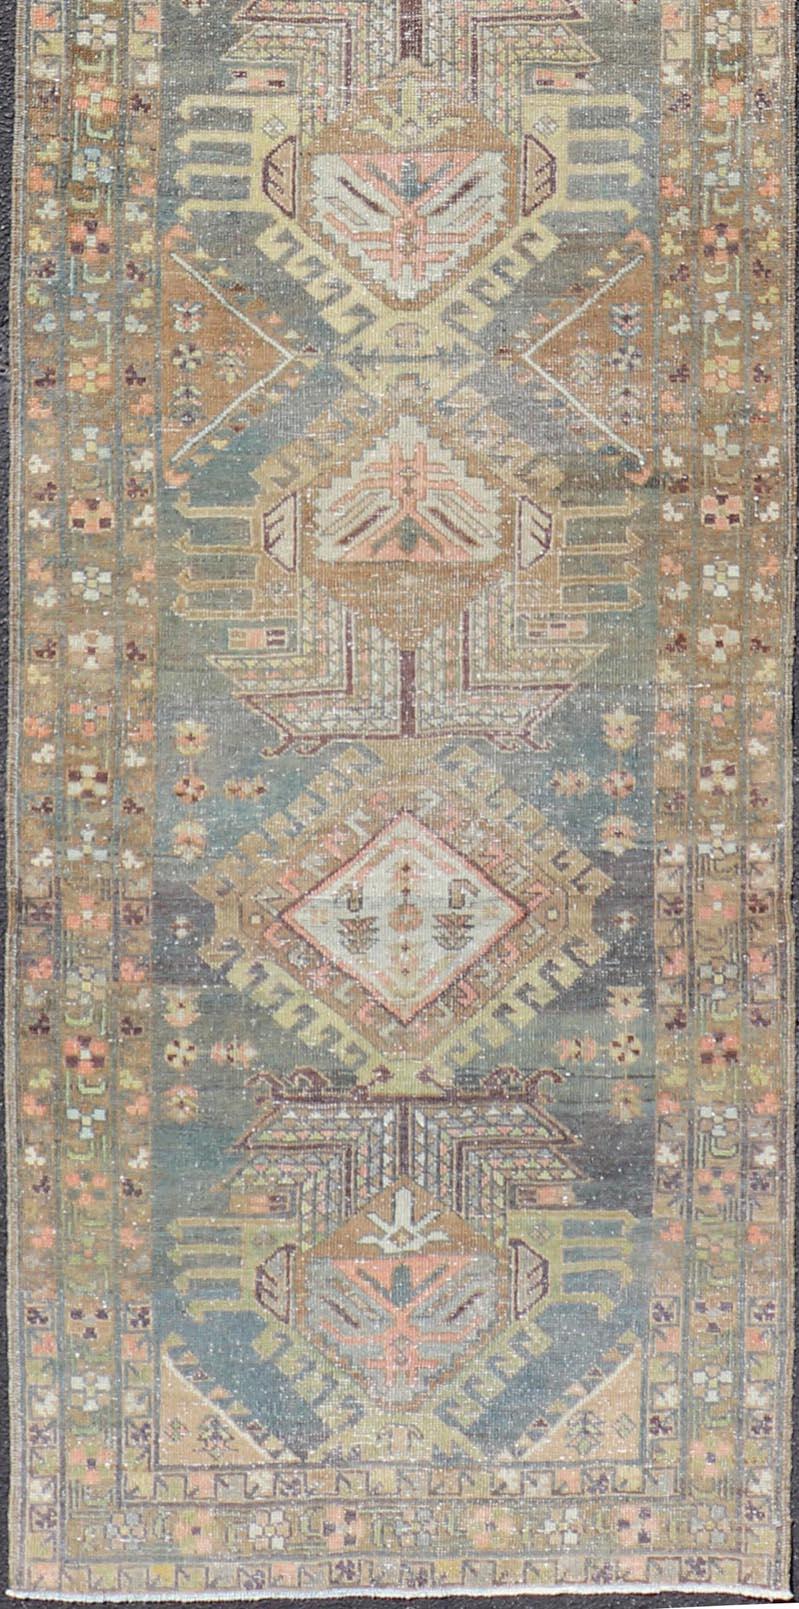 20th Century Heriz Antique Persian Rug with Geometric Medallions in Steal Blue, Brown & Peach For Sale